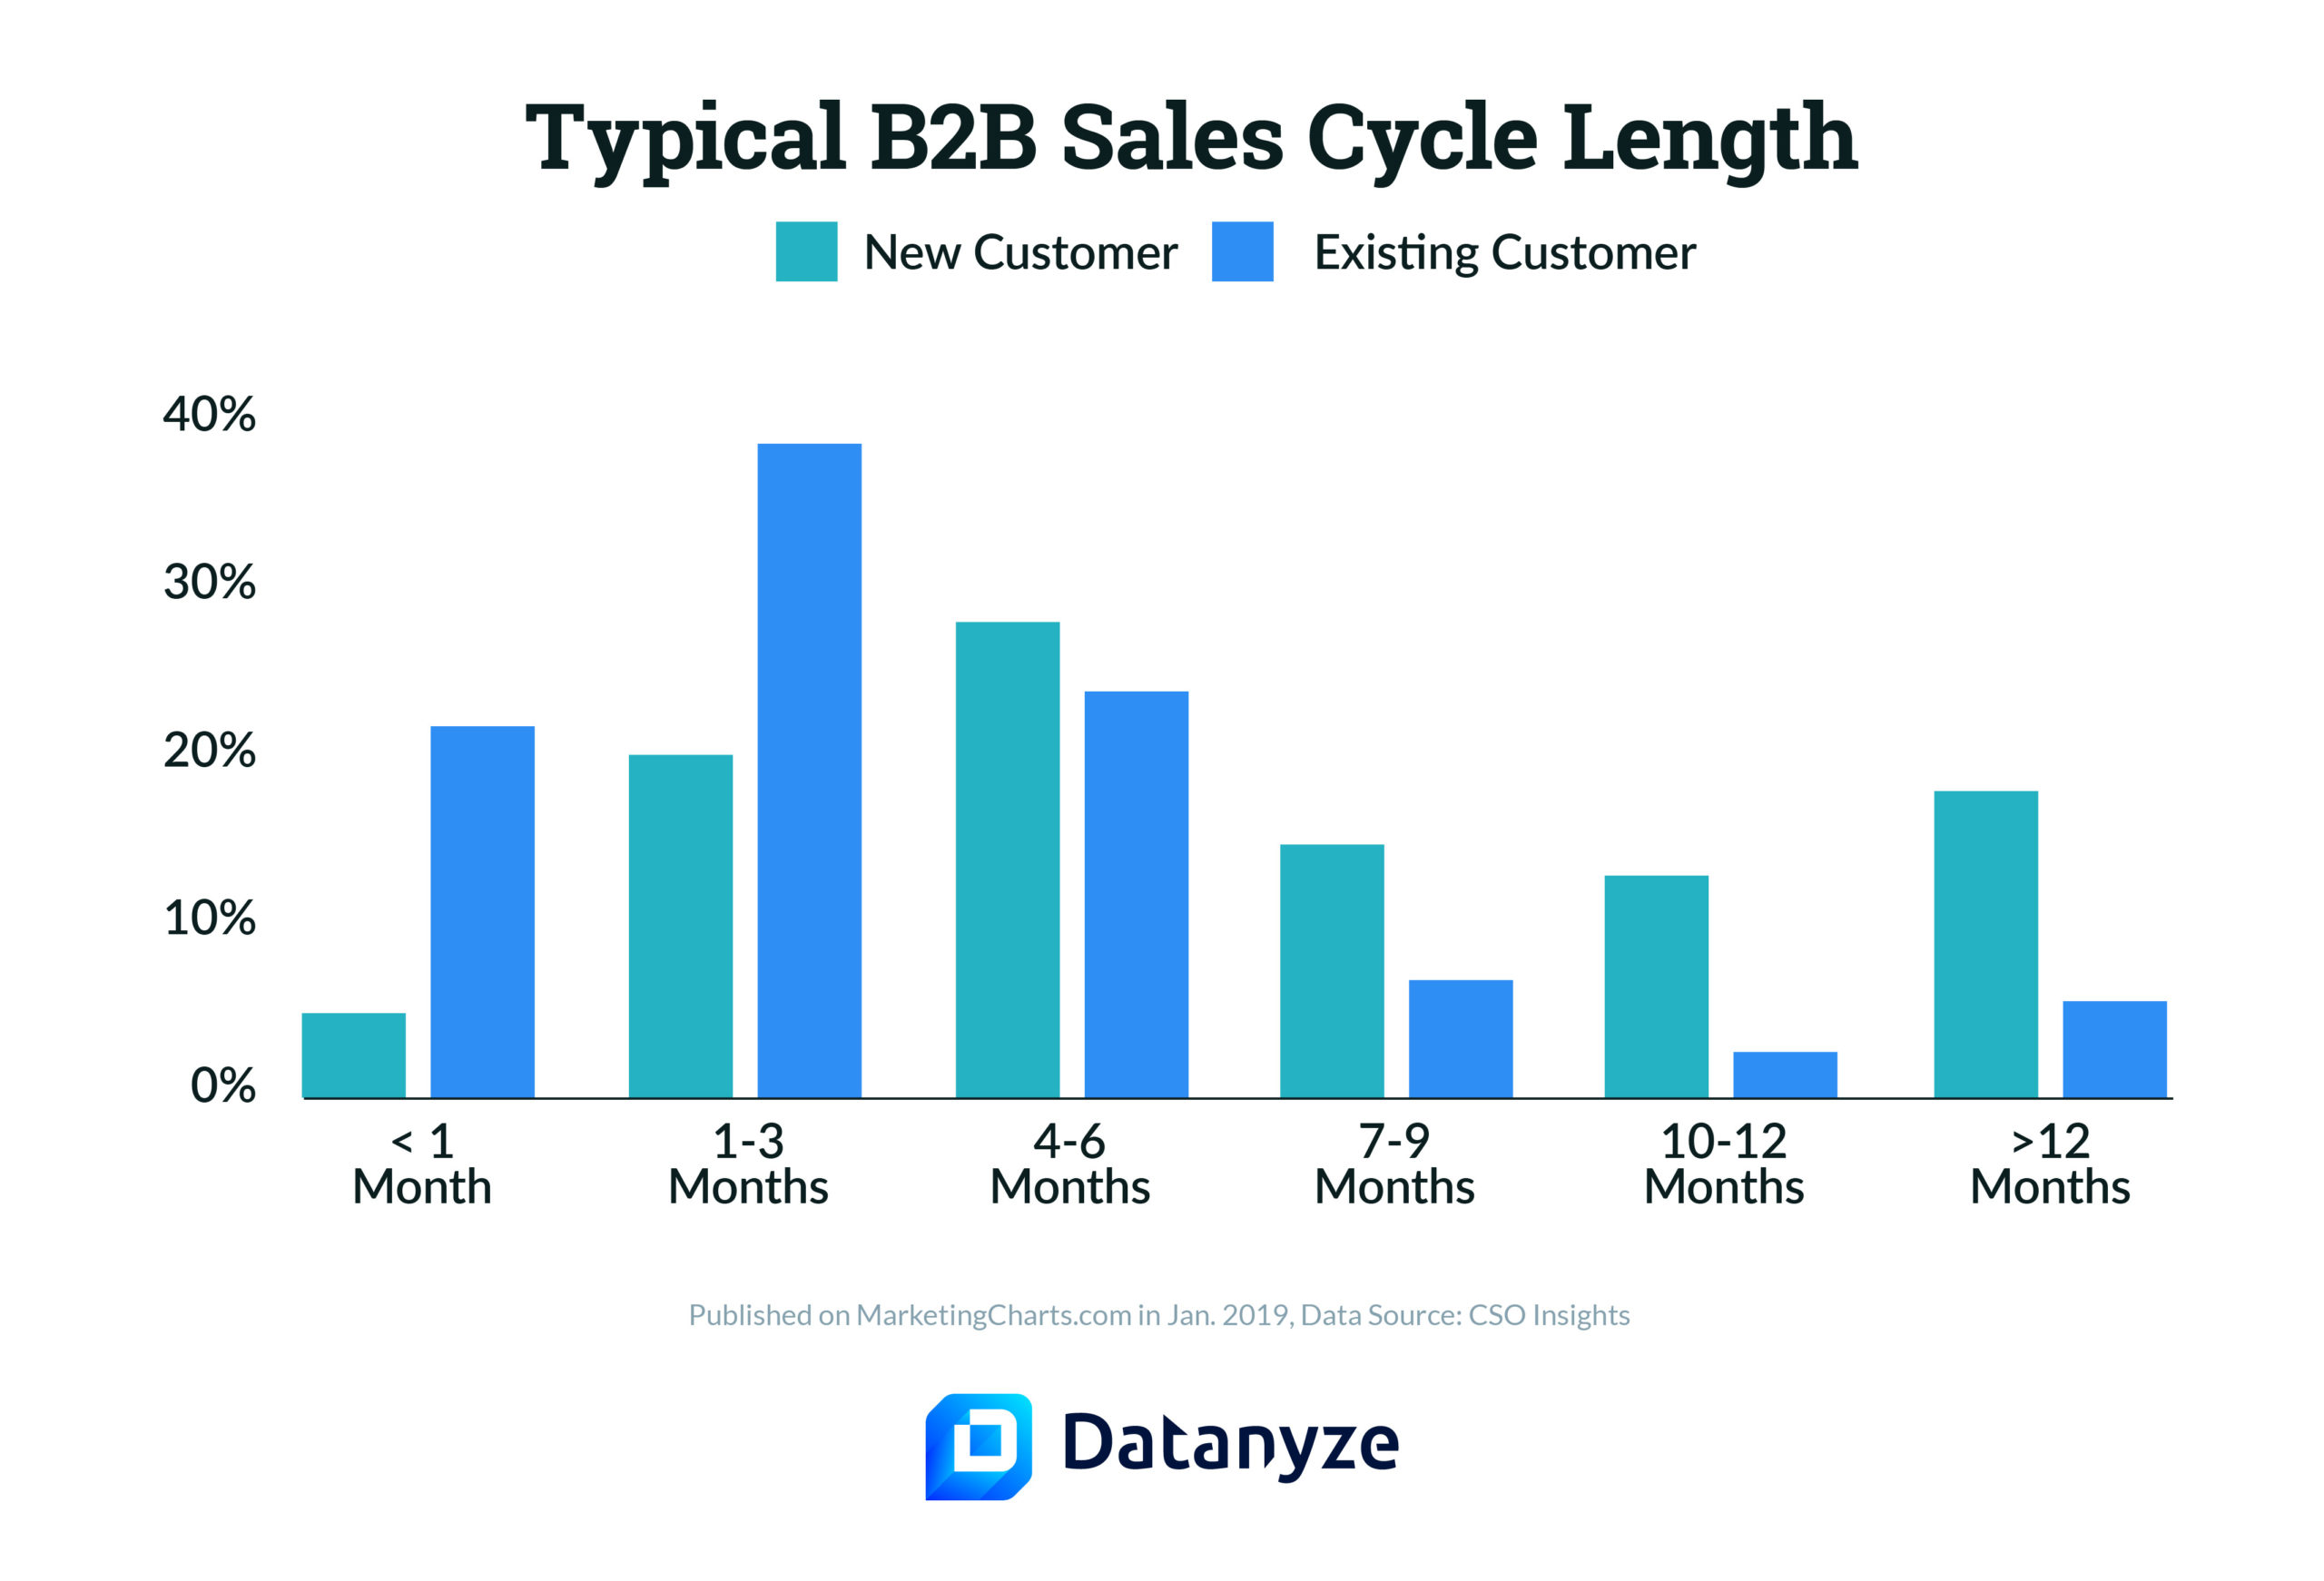 How Long Is a Typical B2B Sales Cycle?